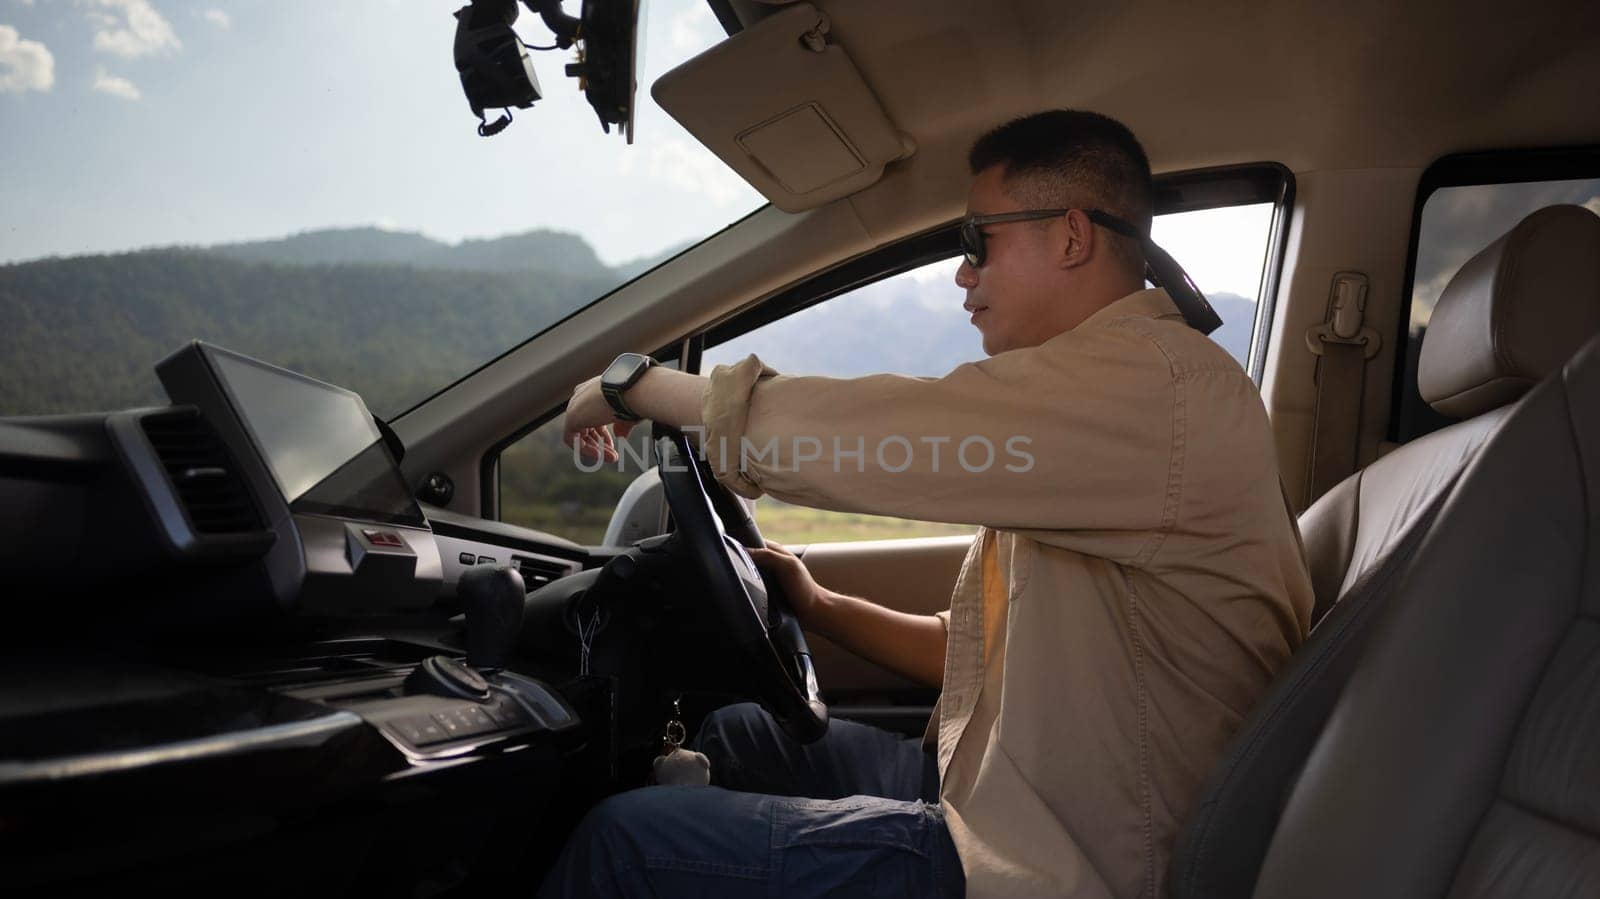 Man in sunglasses driving on holiday adventure. Road trip, traveling and lifestyle concept.